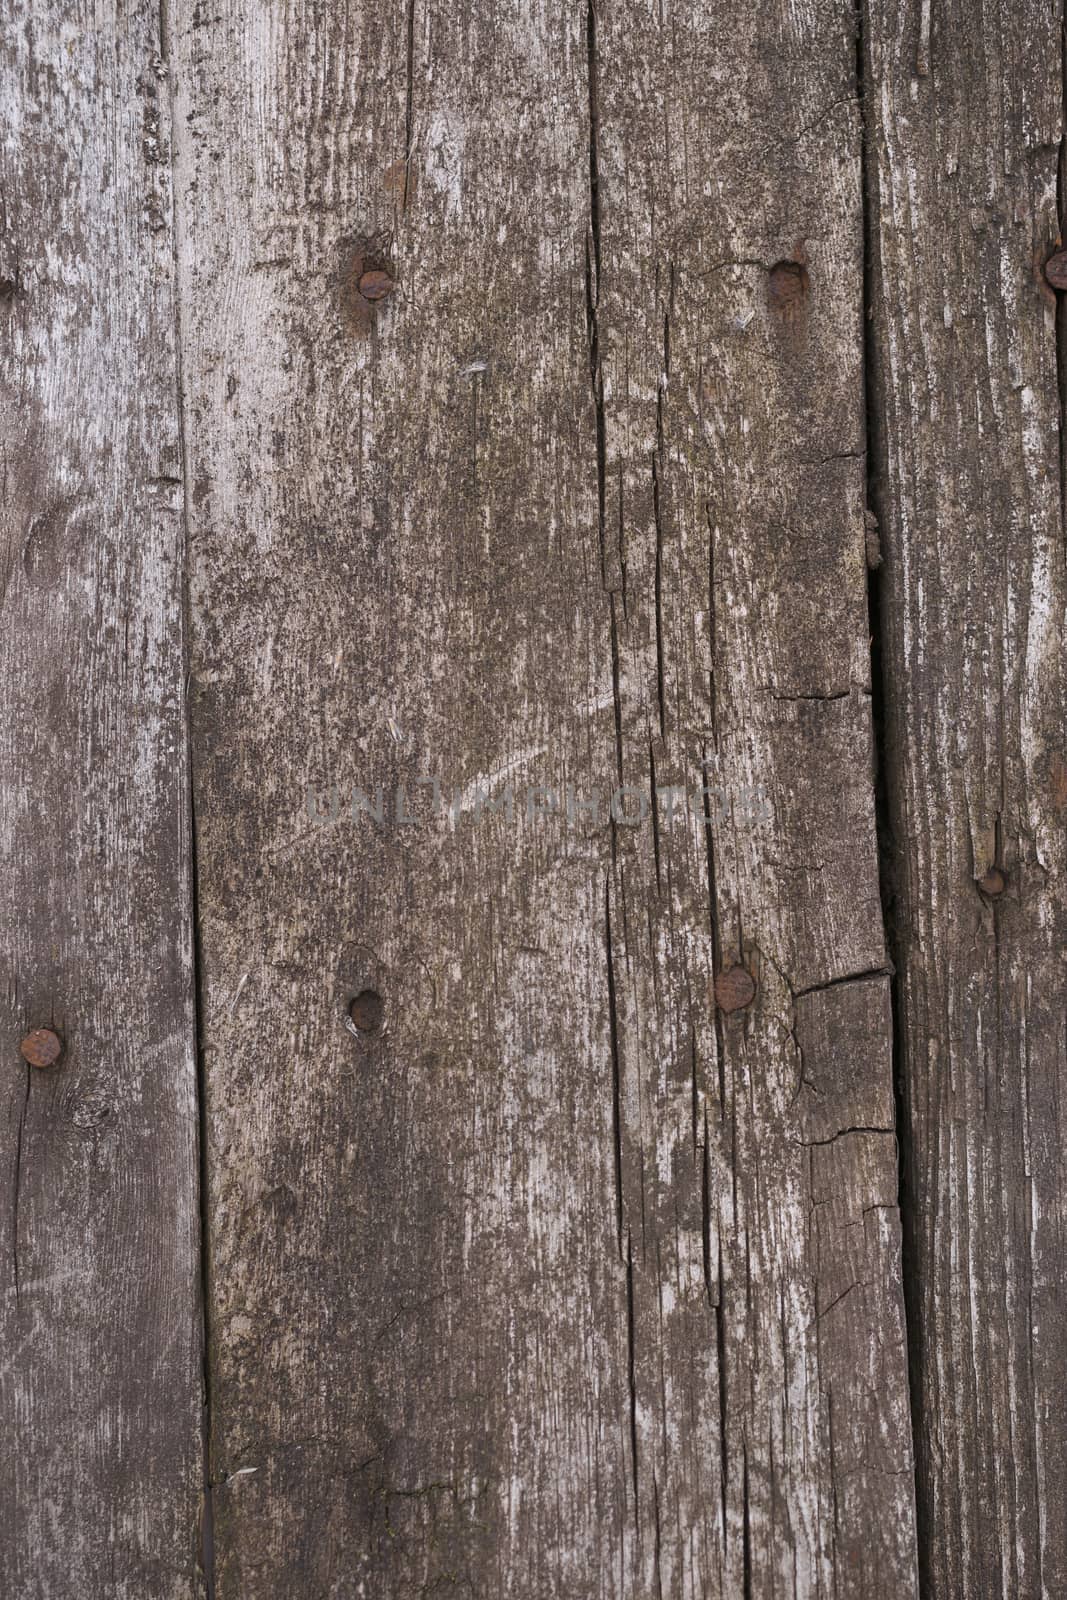 Old wooden texured surface closeup. Moss and relief on surface. Stock photo of old wooden pattern of aged boards with moss. Brown and gray colors on photo.